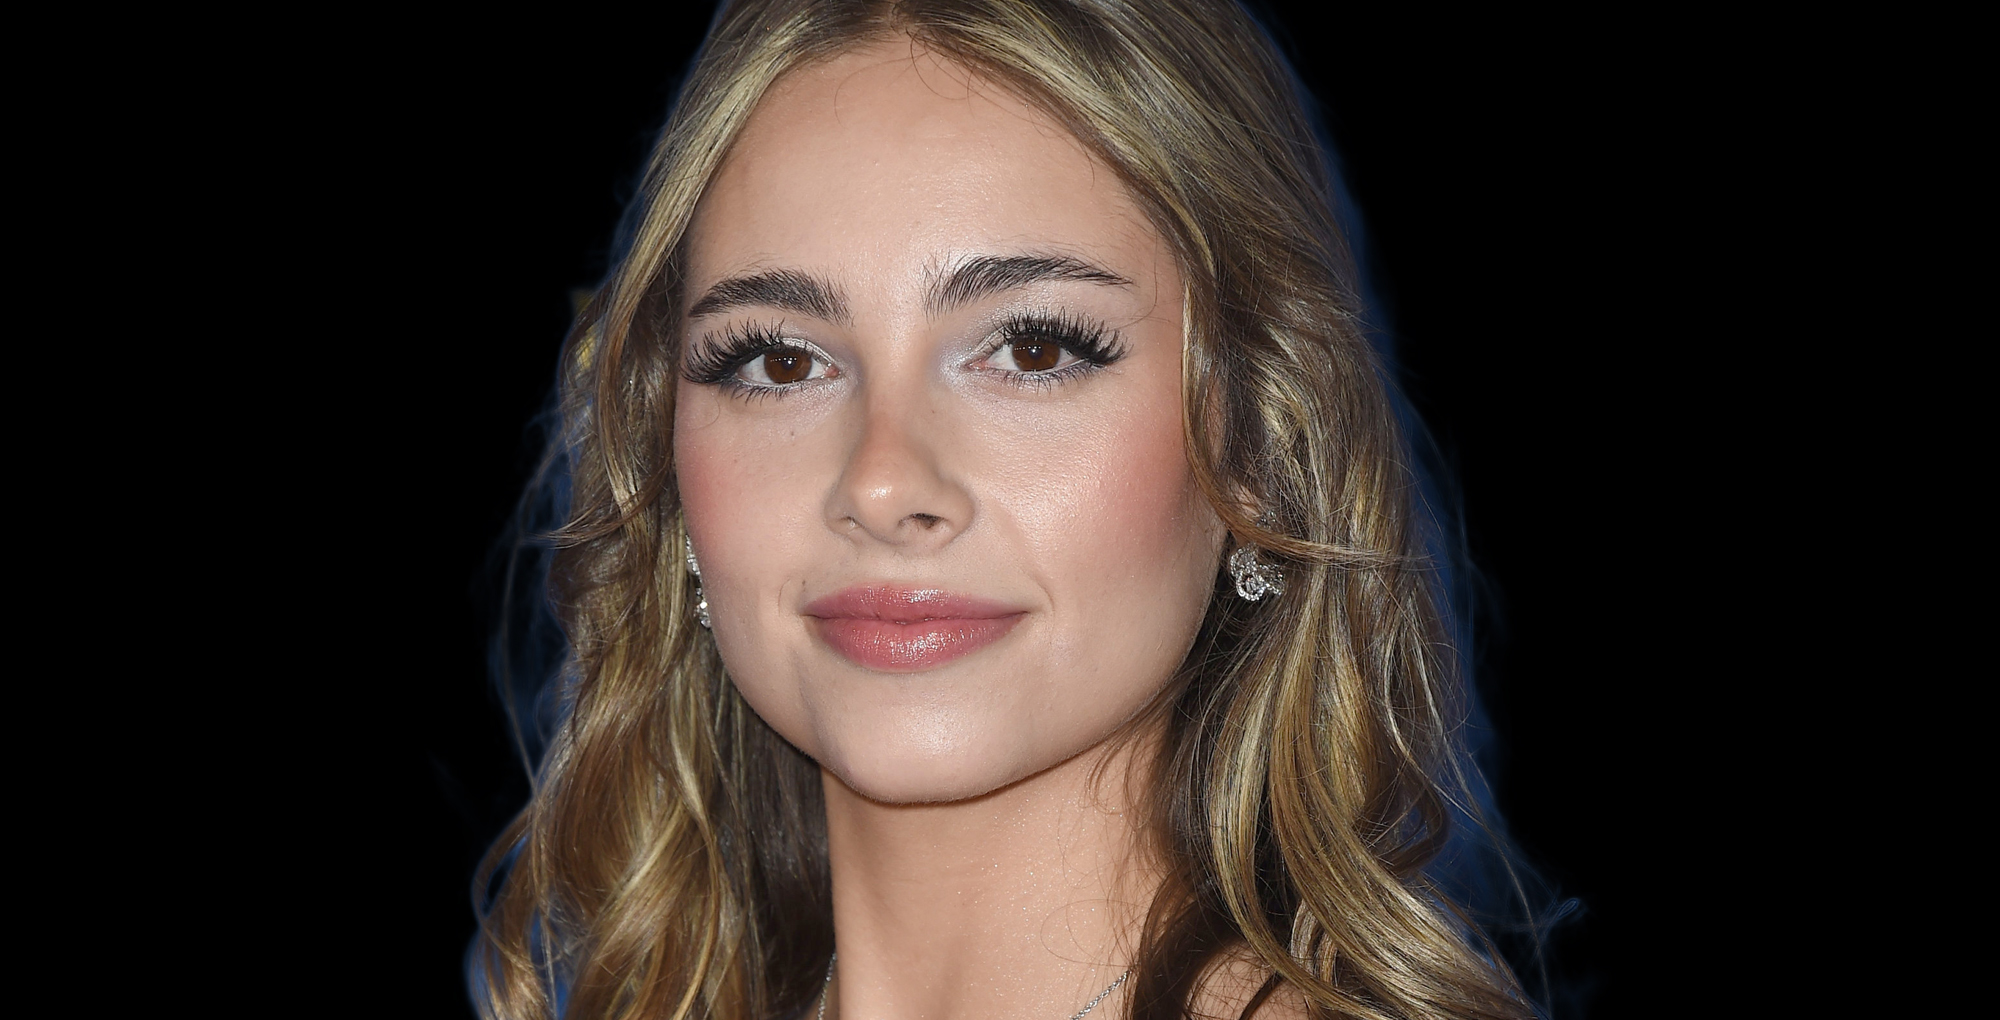 haley pullos who plays molly lansing-davis on general hospital.